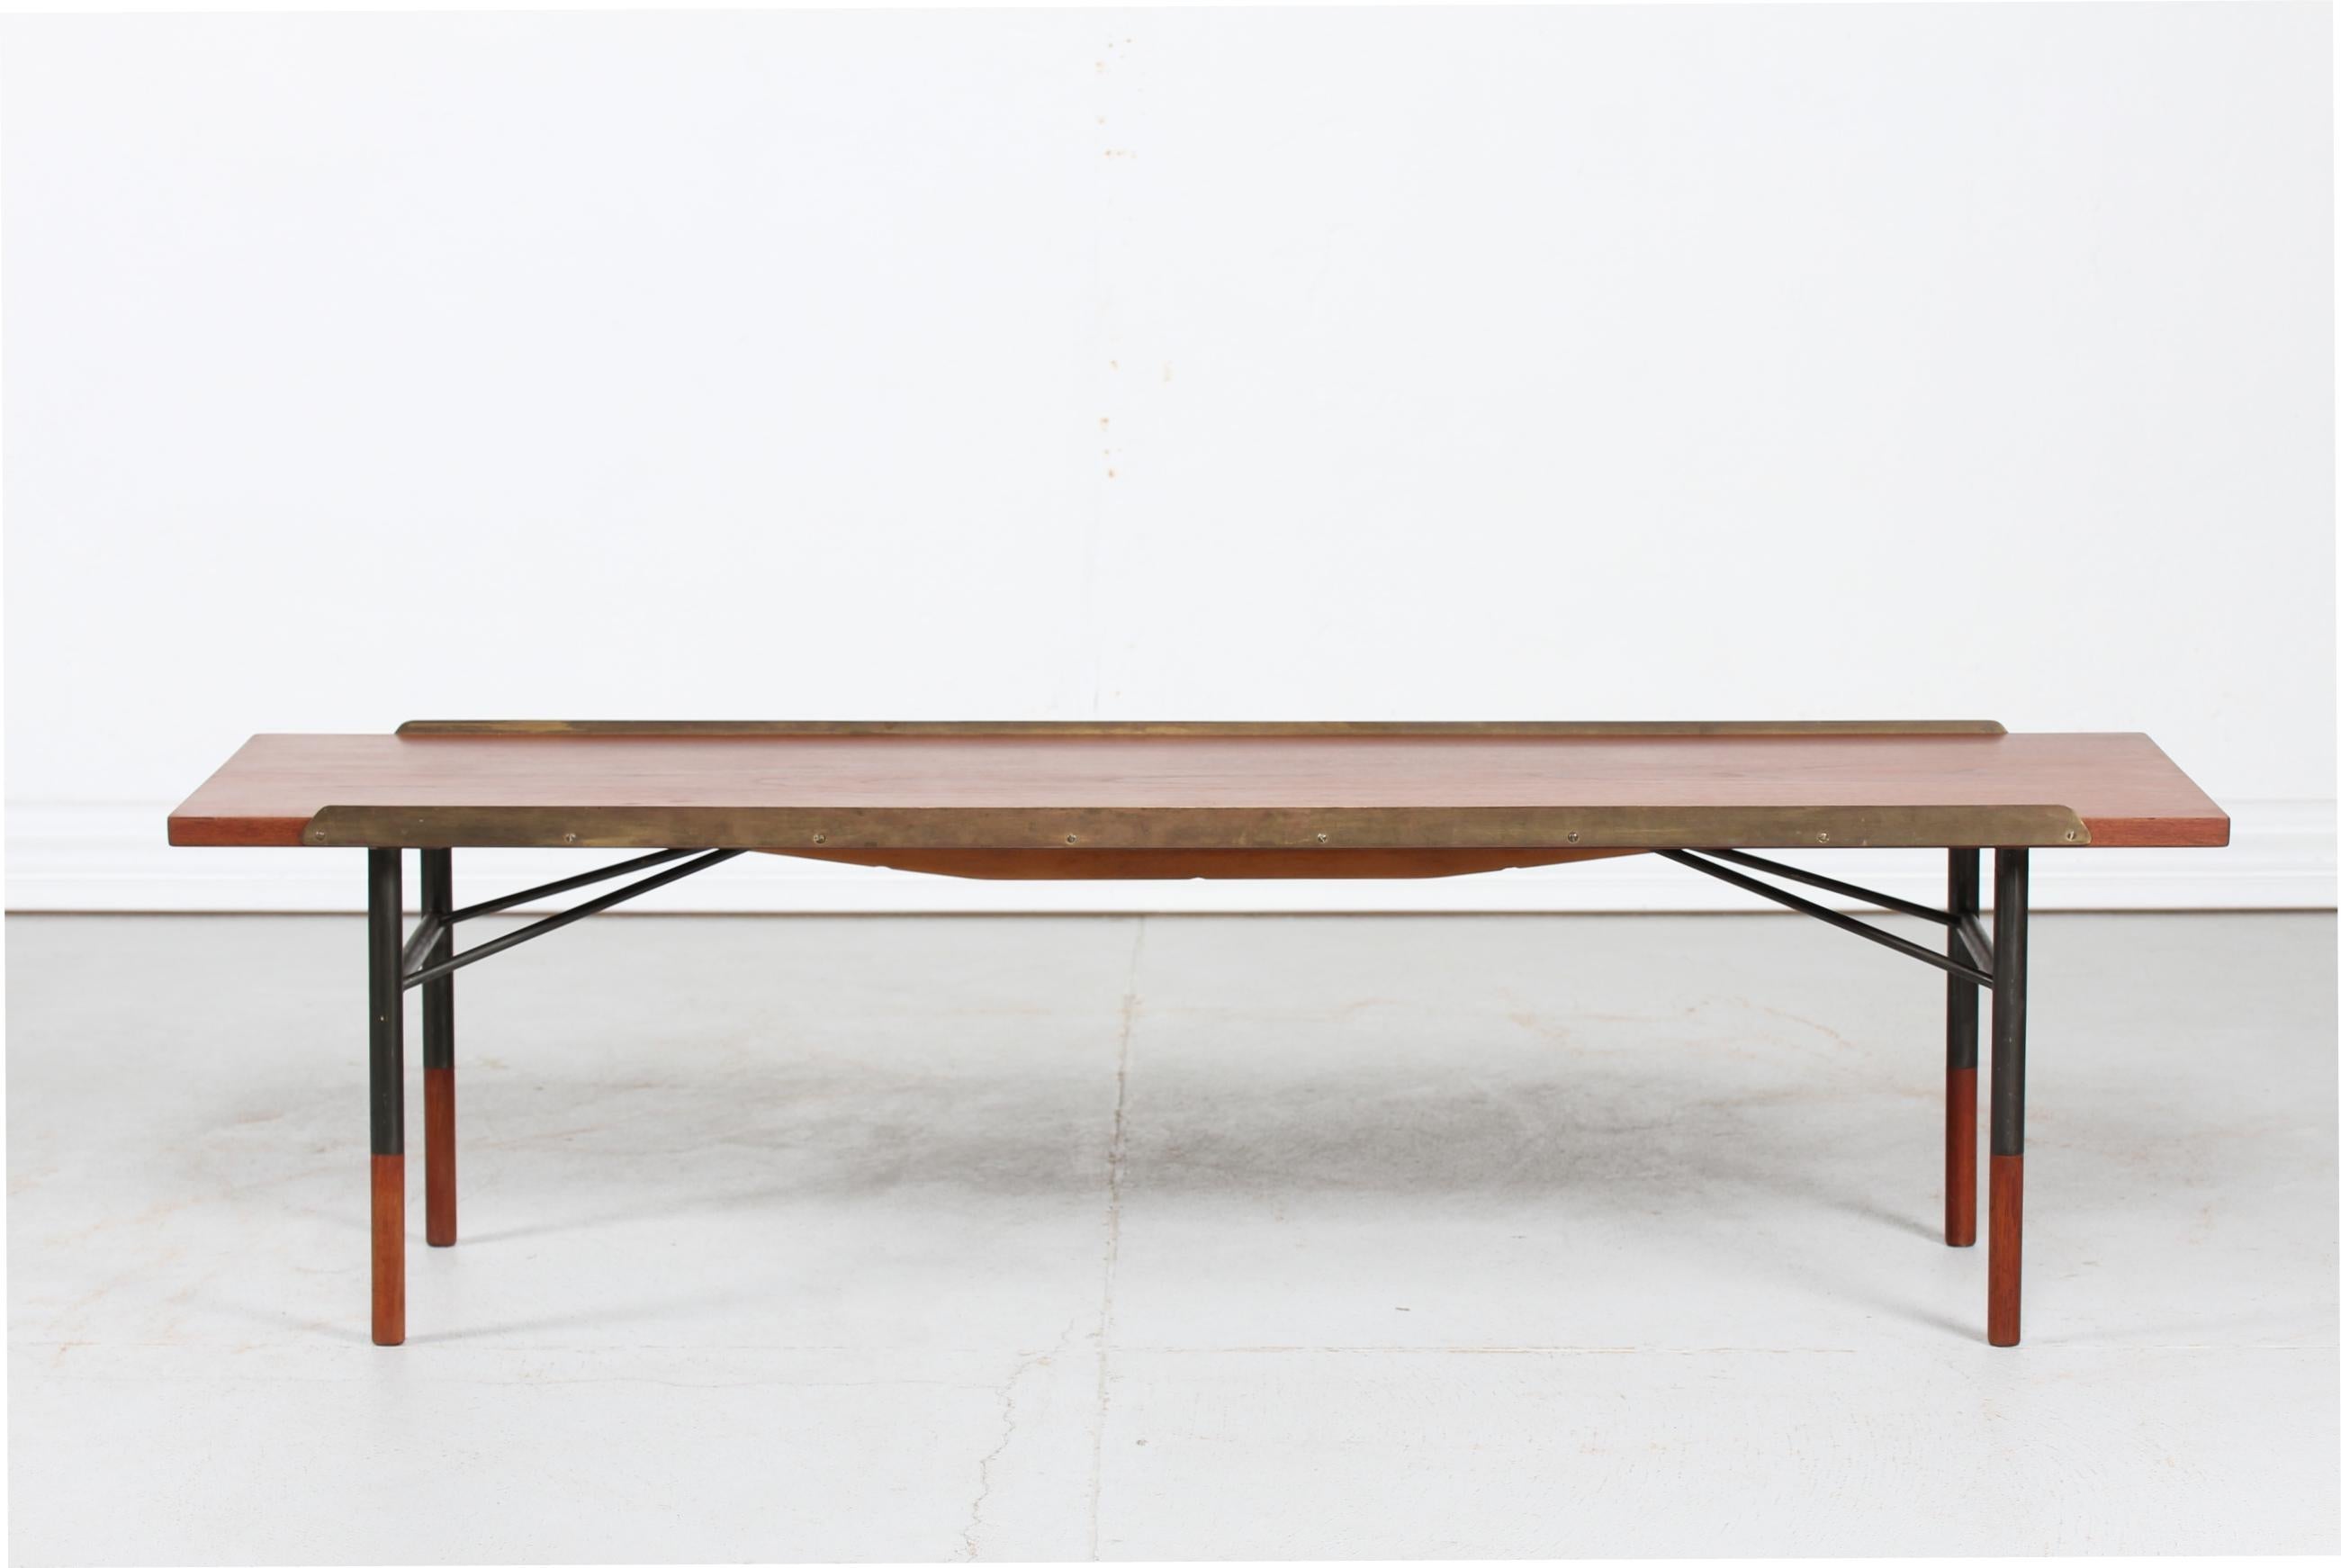 Bench or long table model BO-101 designed by the Danish architect and furniture designer Finn Juhl (1912-1989) in 1953.
It is made of teak with brass edges and metal frame, legs ends of teak
Manufactured by Bovirke in the 1950s. Measures: L